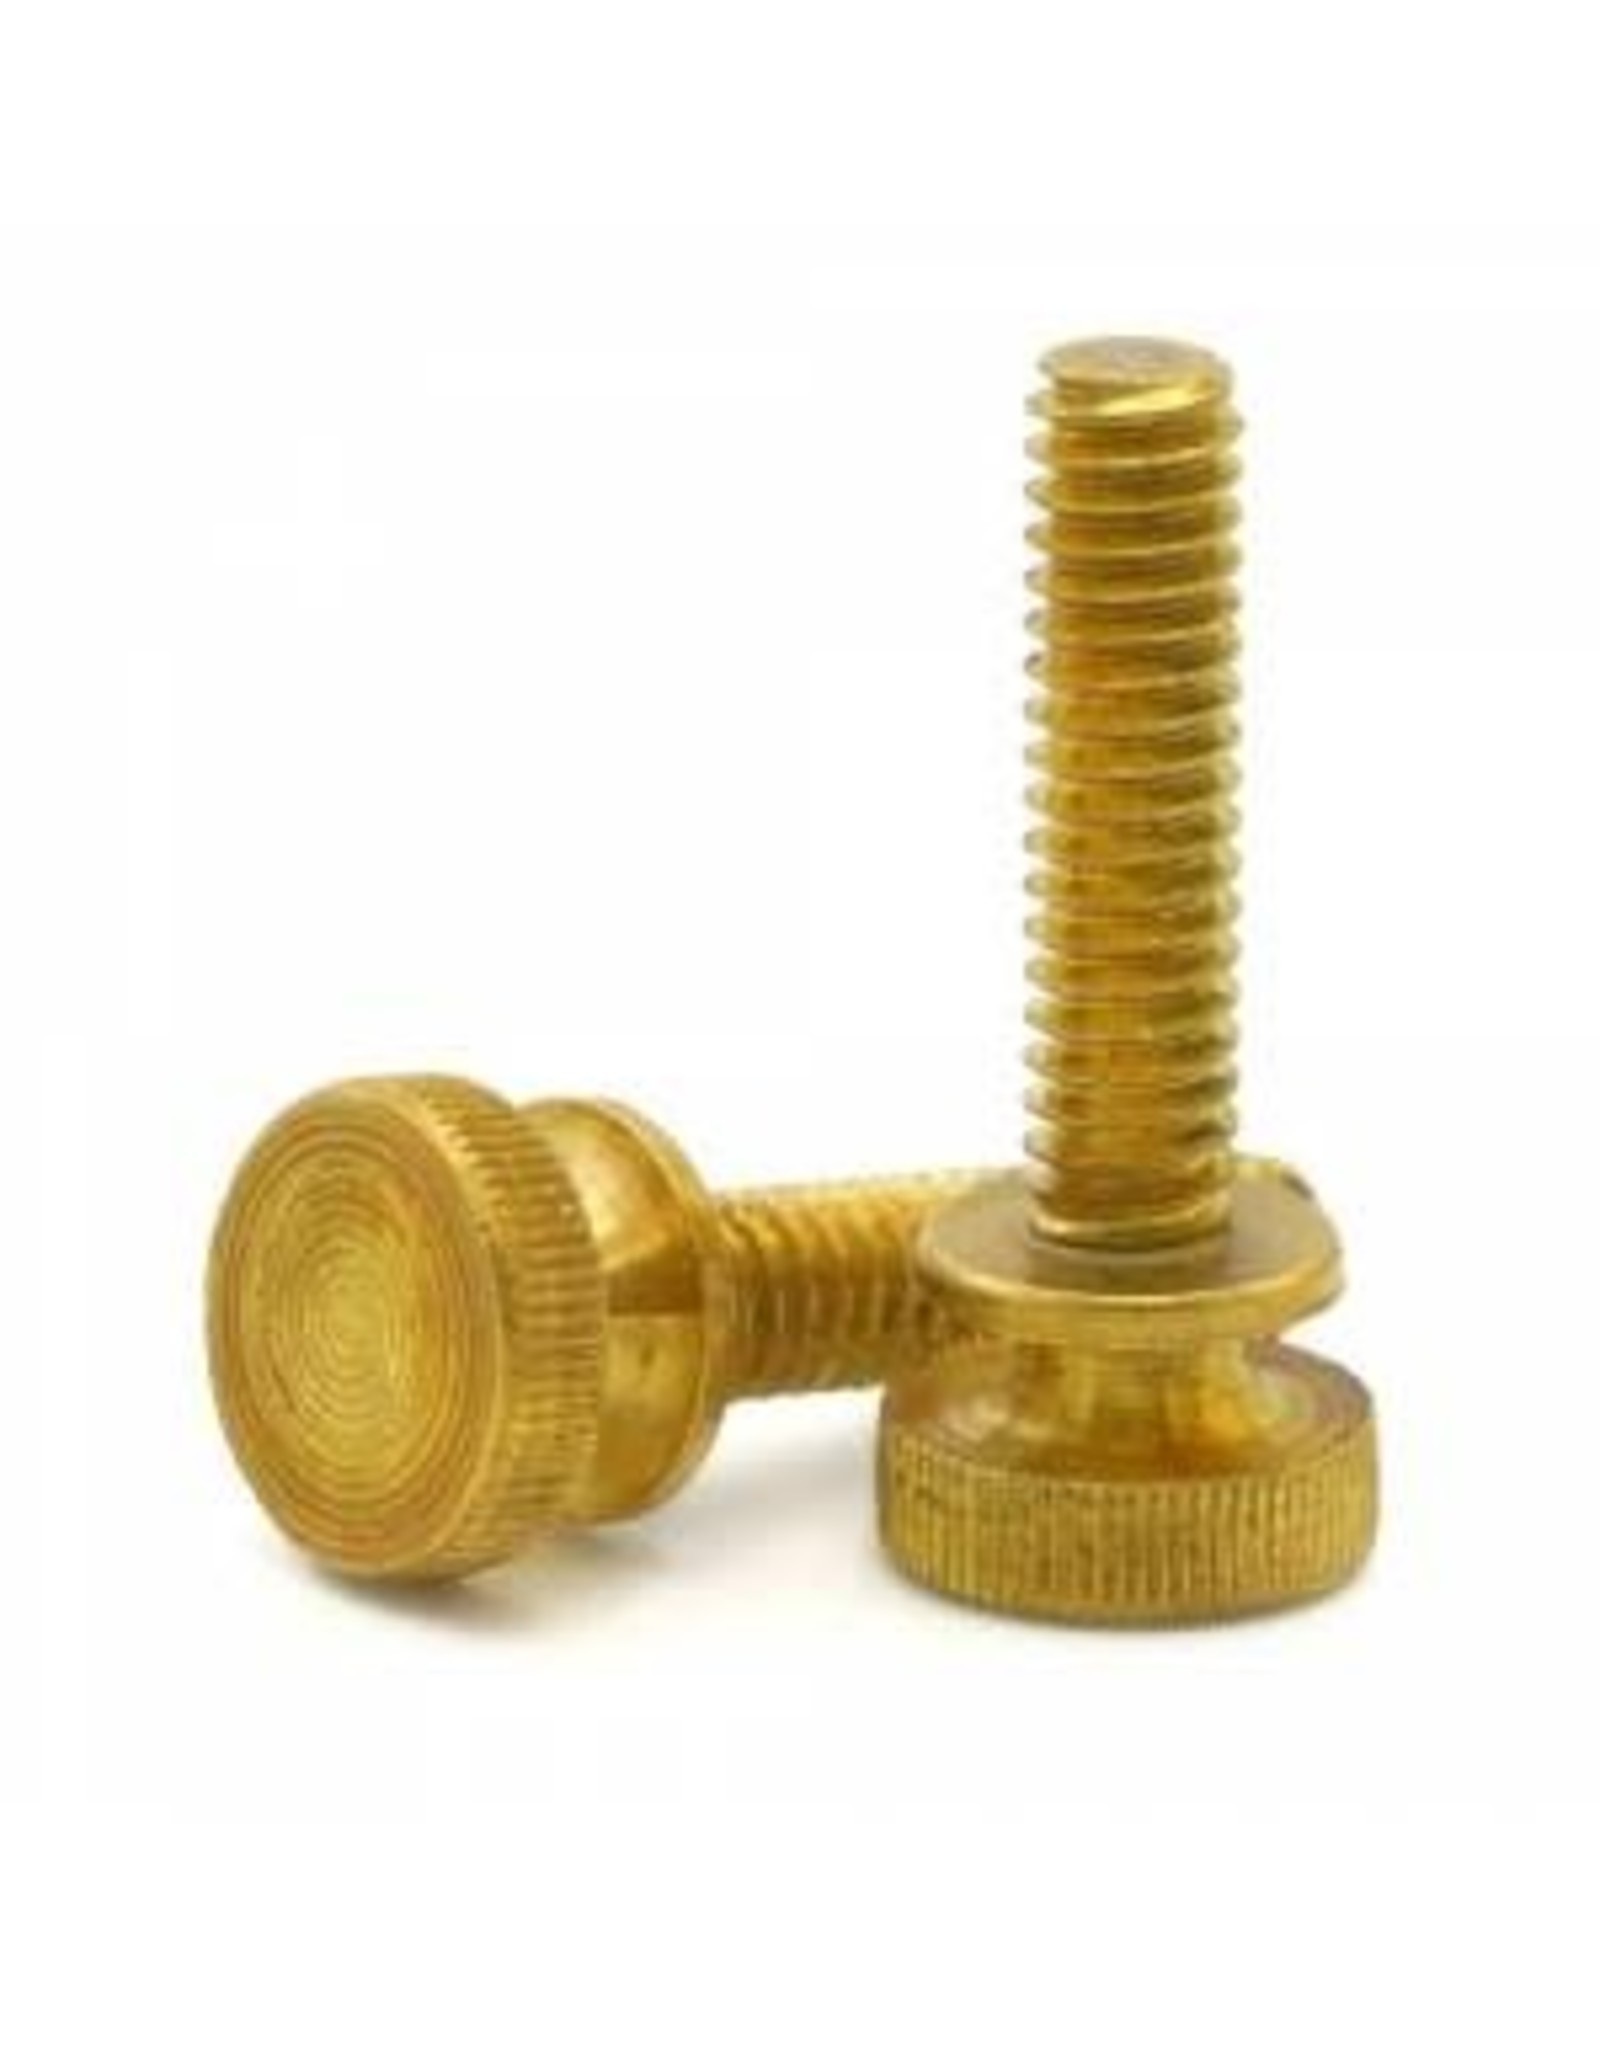 Brass Knurled Thumbscrews 8-32 x 3/4" (pack of 2)